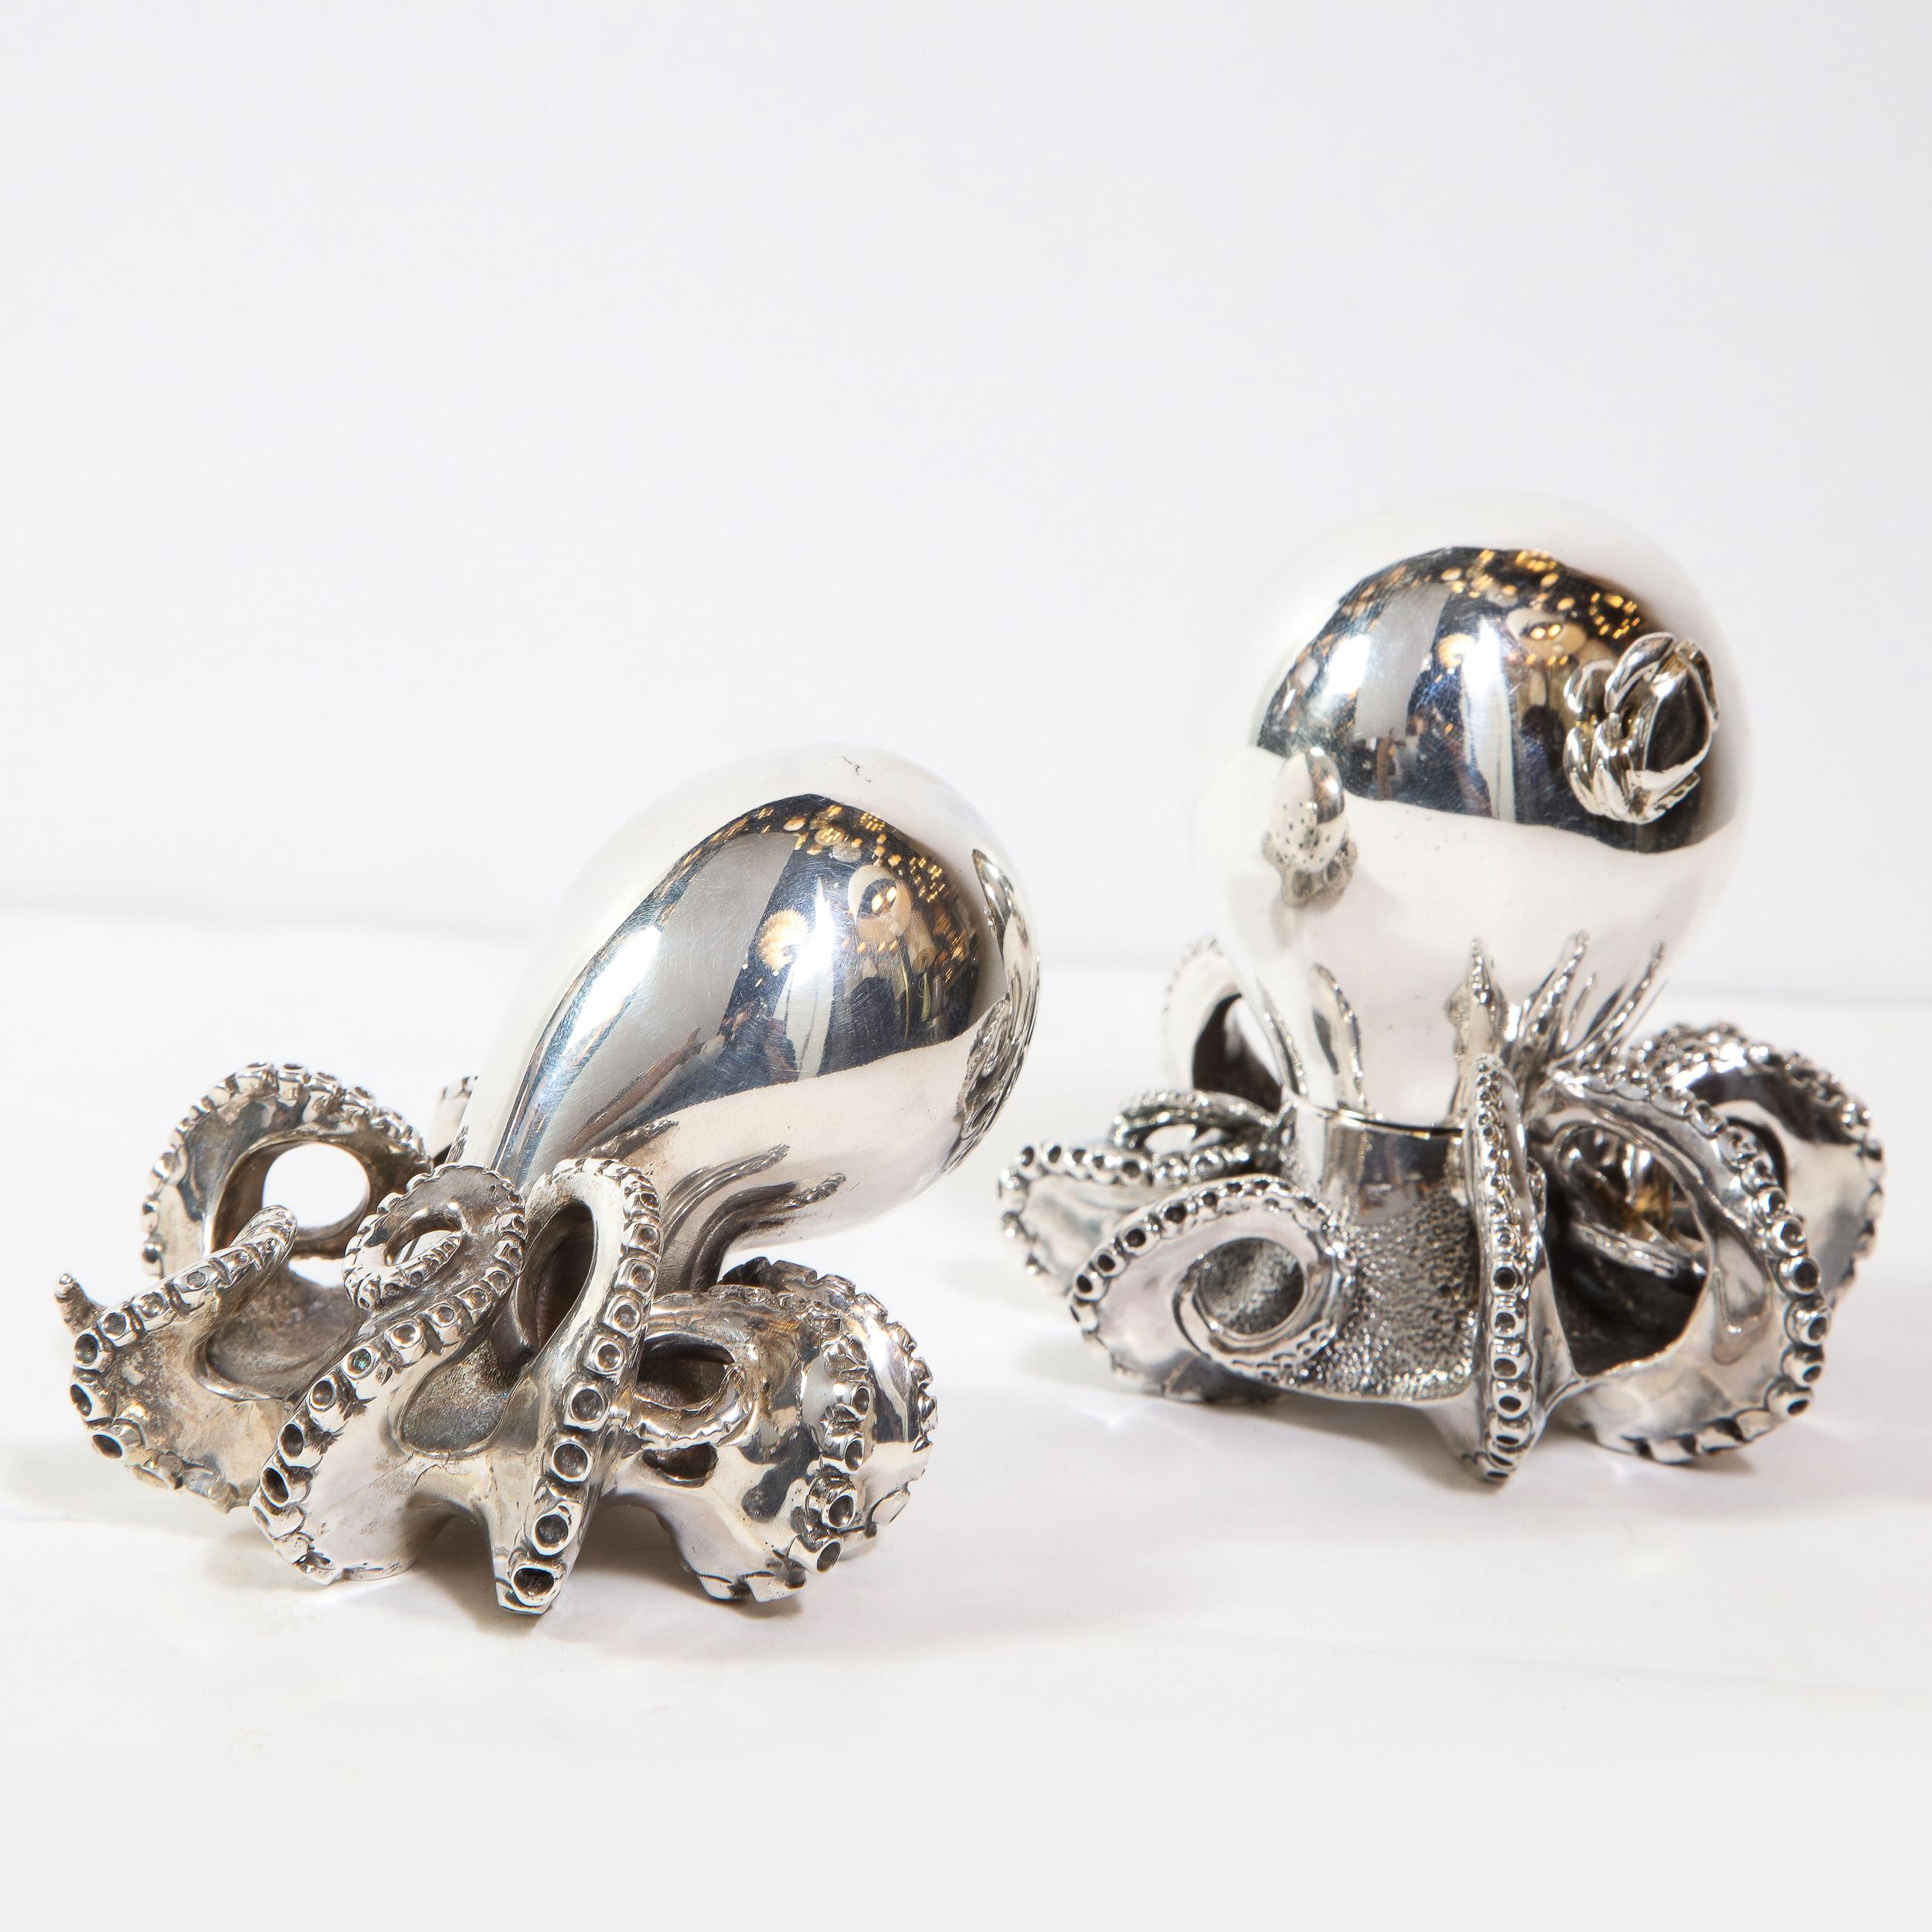 Handcrafted Sterling Silver Octopus Salt Shaker and Pepper Mill by Missiaglia 7